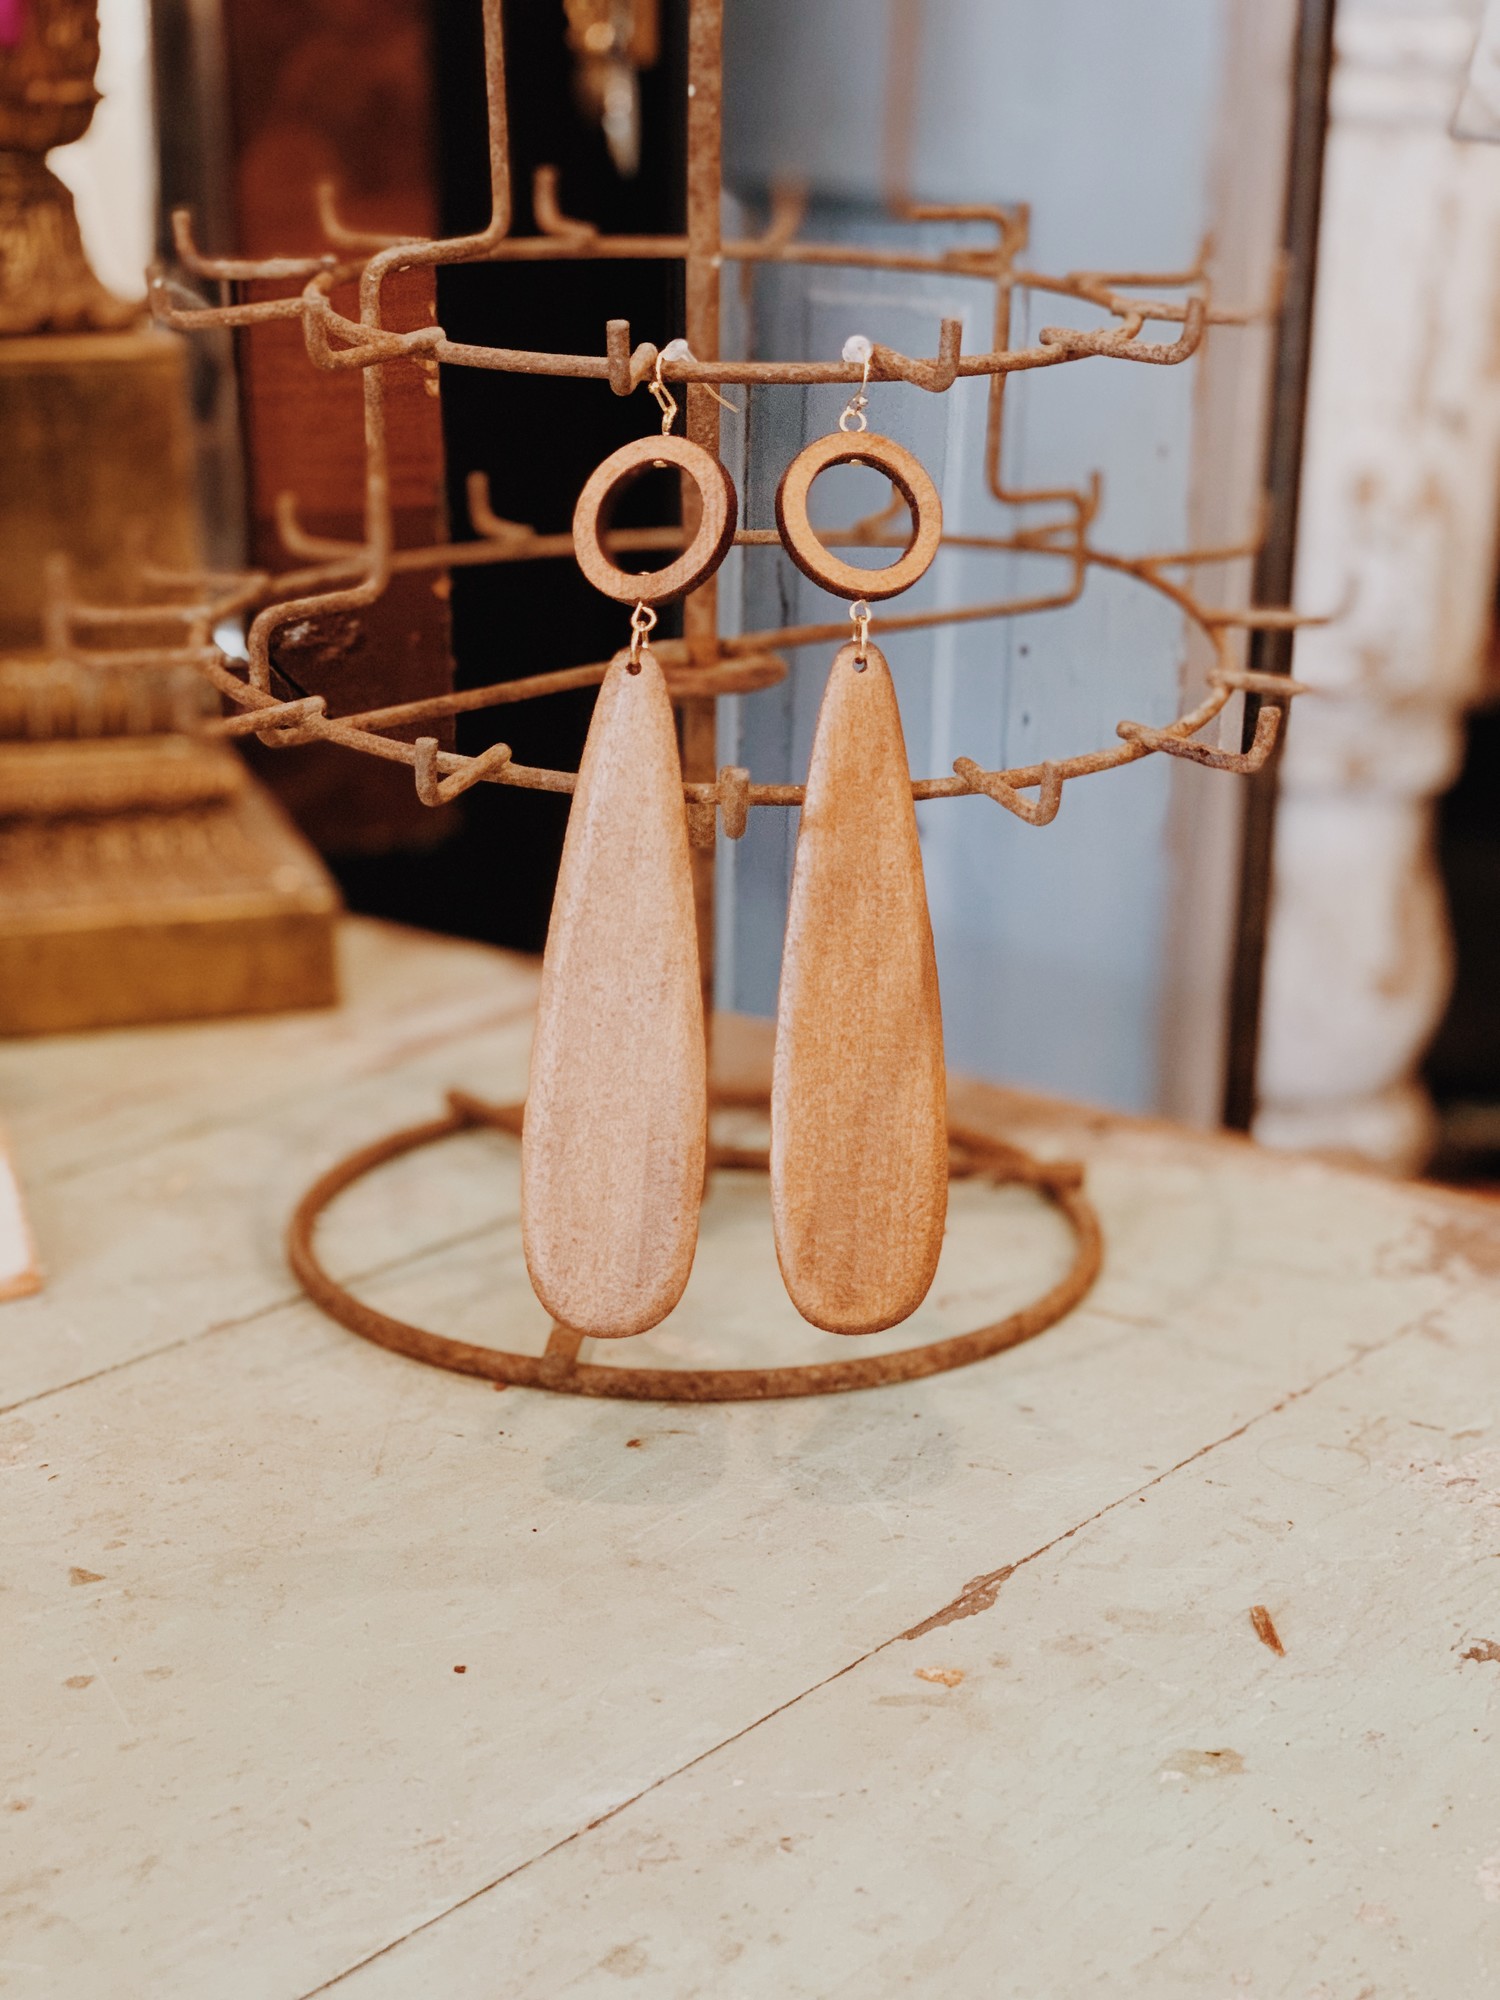 These 6 inch long earrings are the perfect finishing touch to any boho outfit!